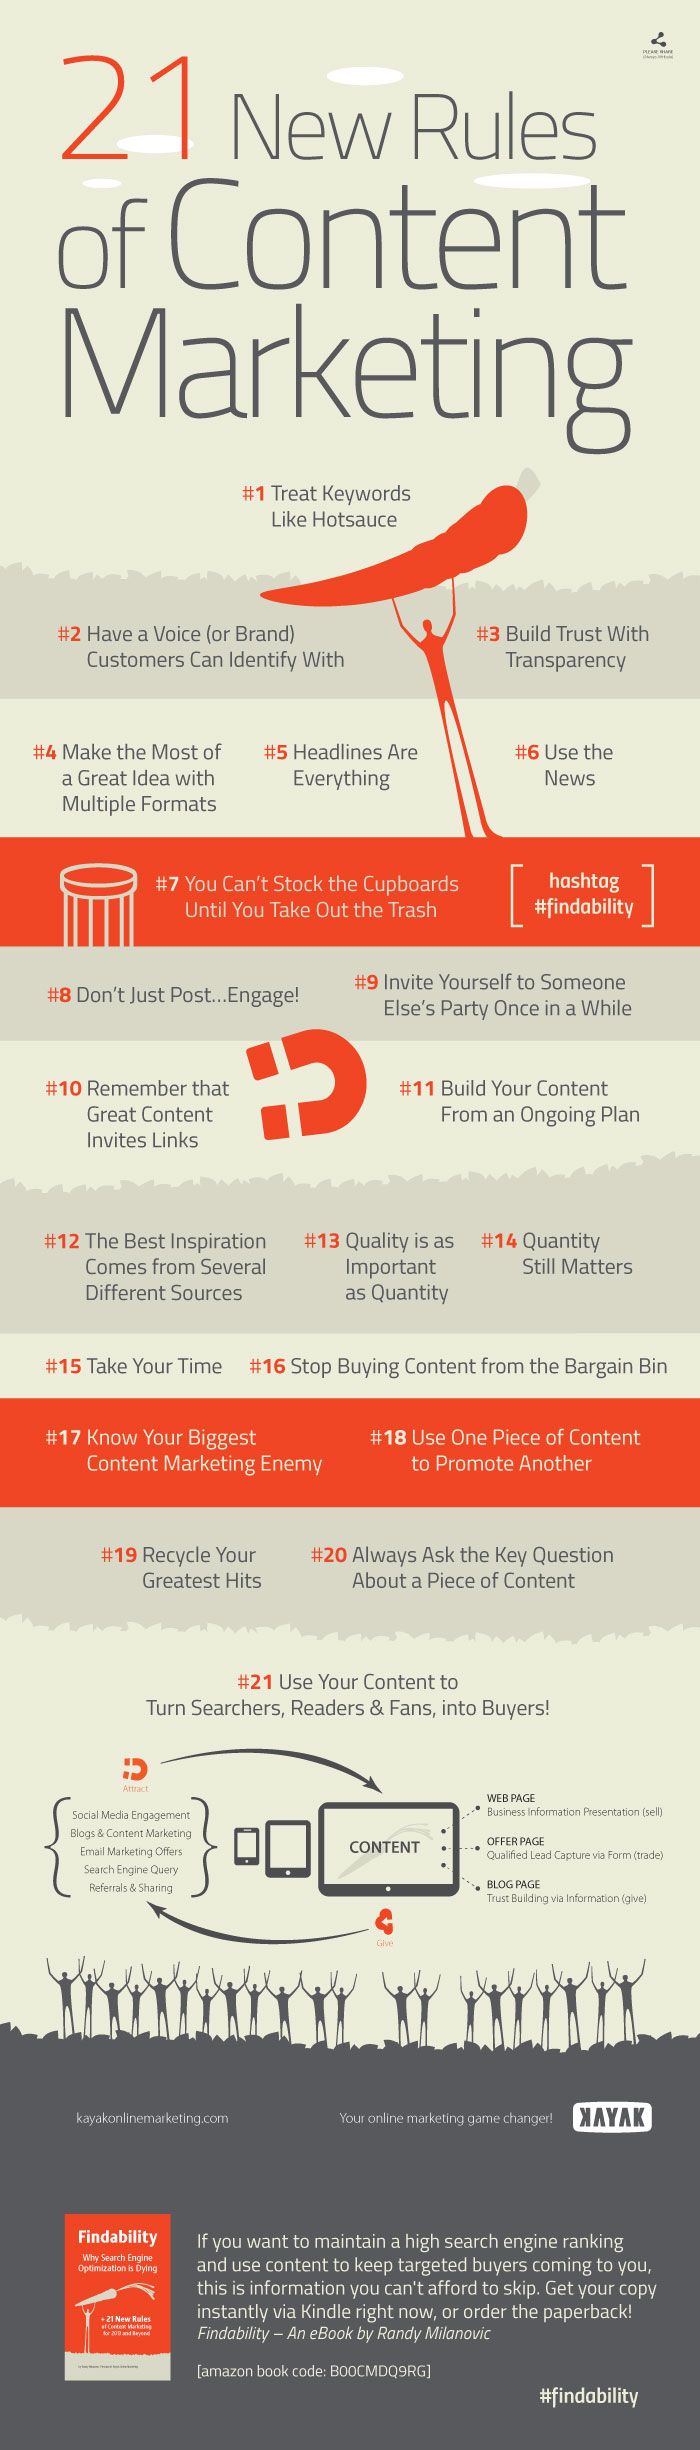 21 Great Content Marketing Tips